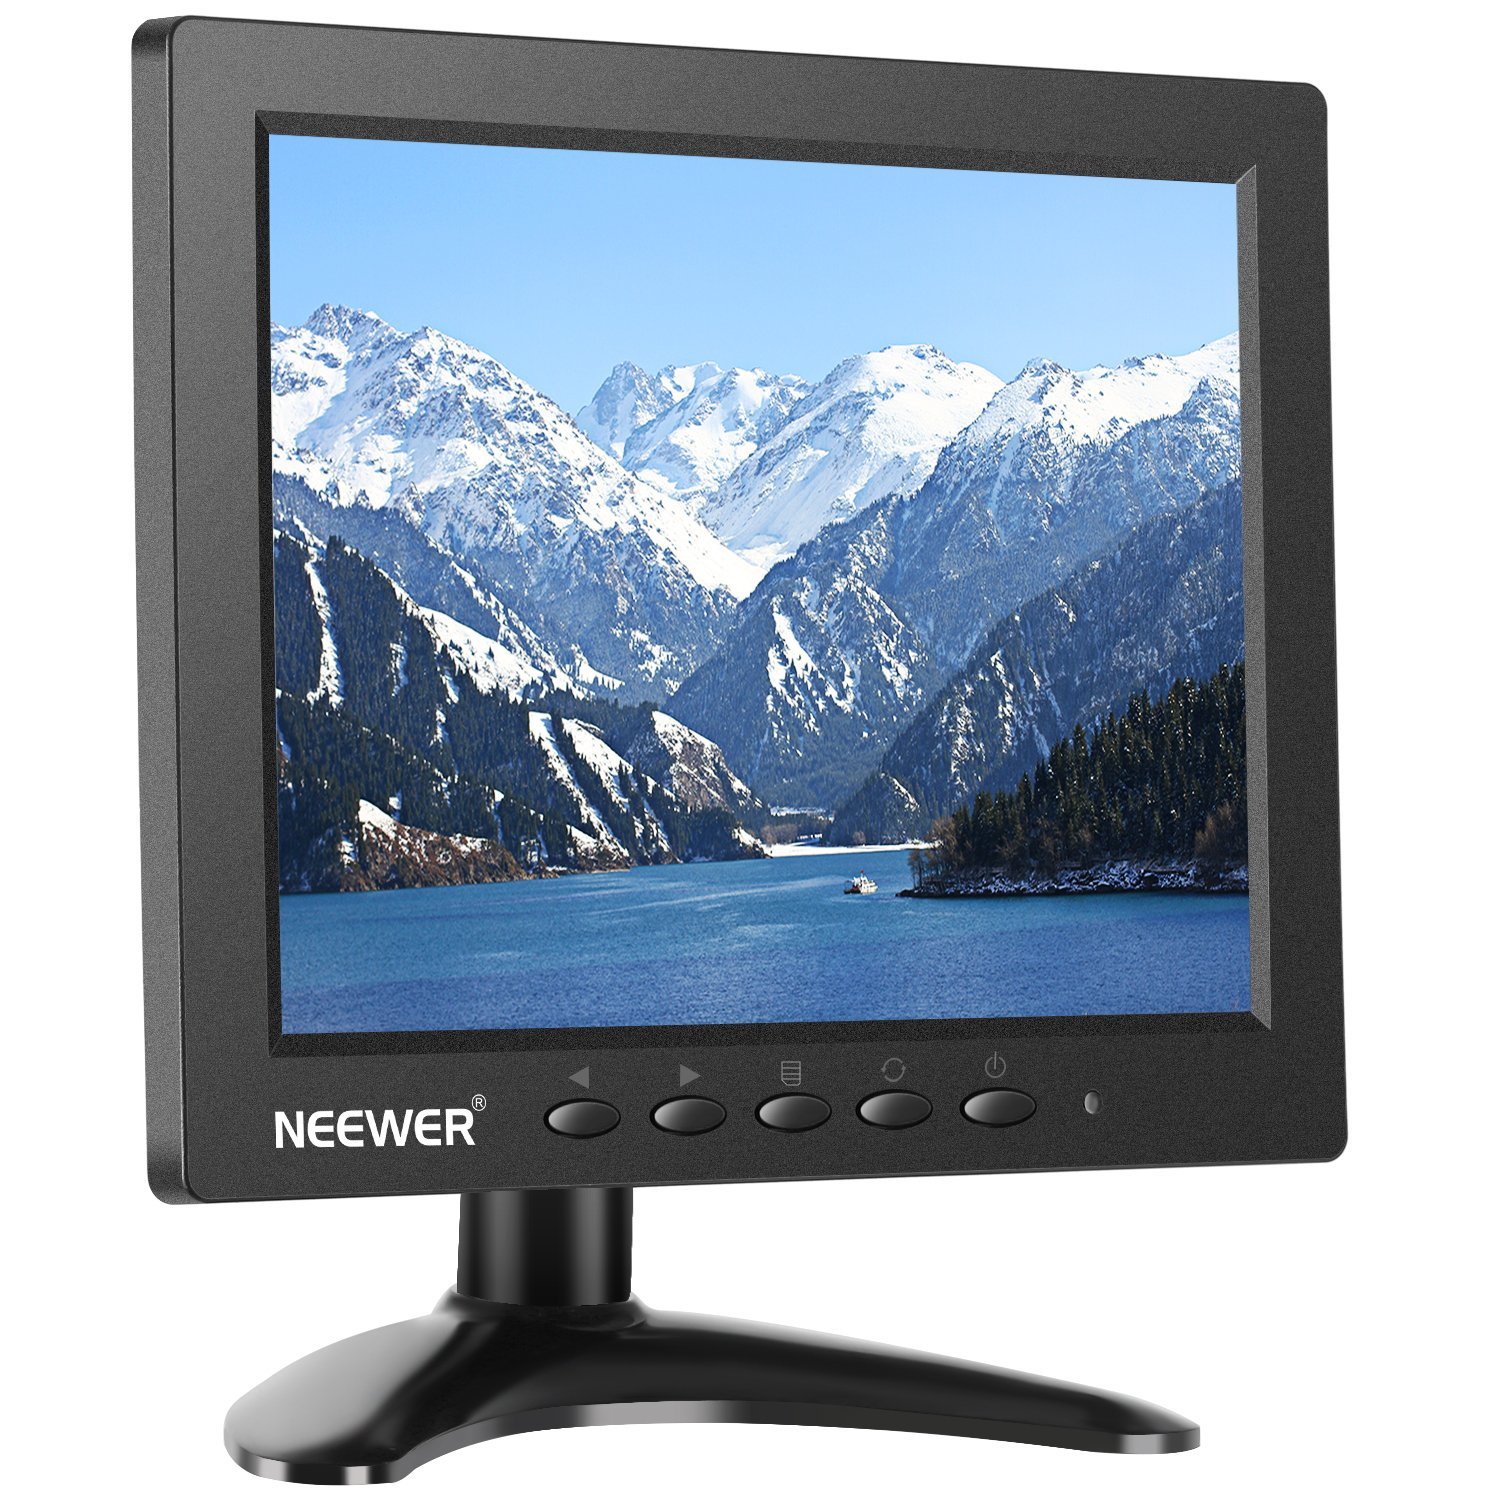 Neewer NW801H 8 inches Monitor with 4:3 TFT-LCD Screen 1024x768